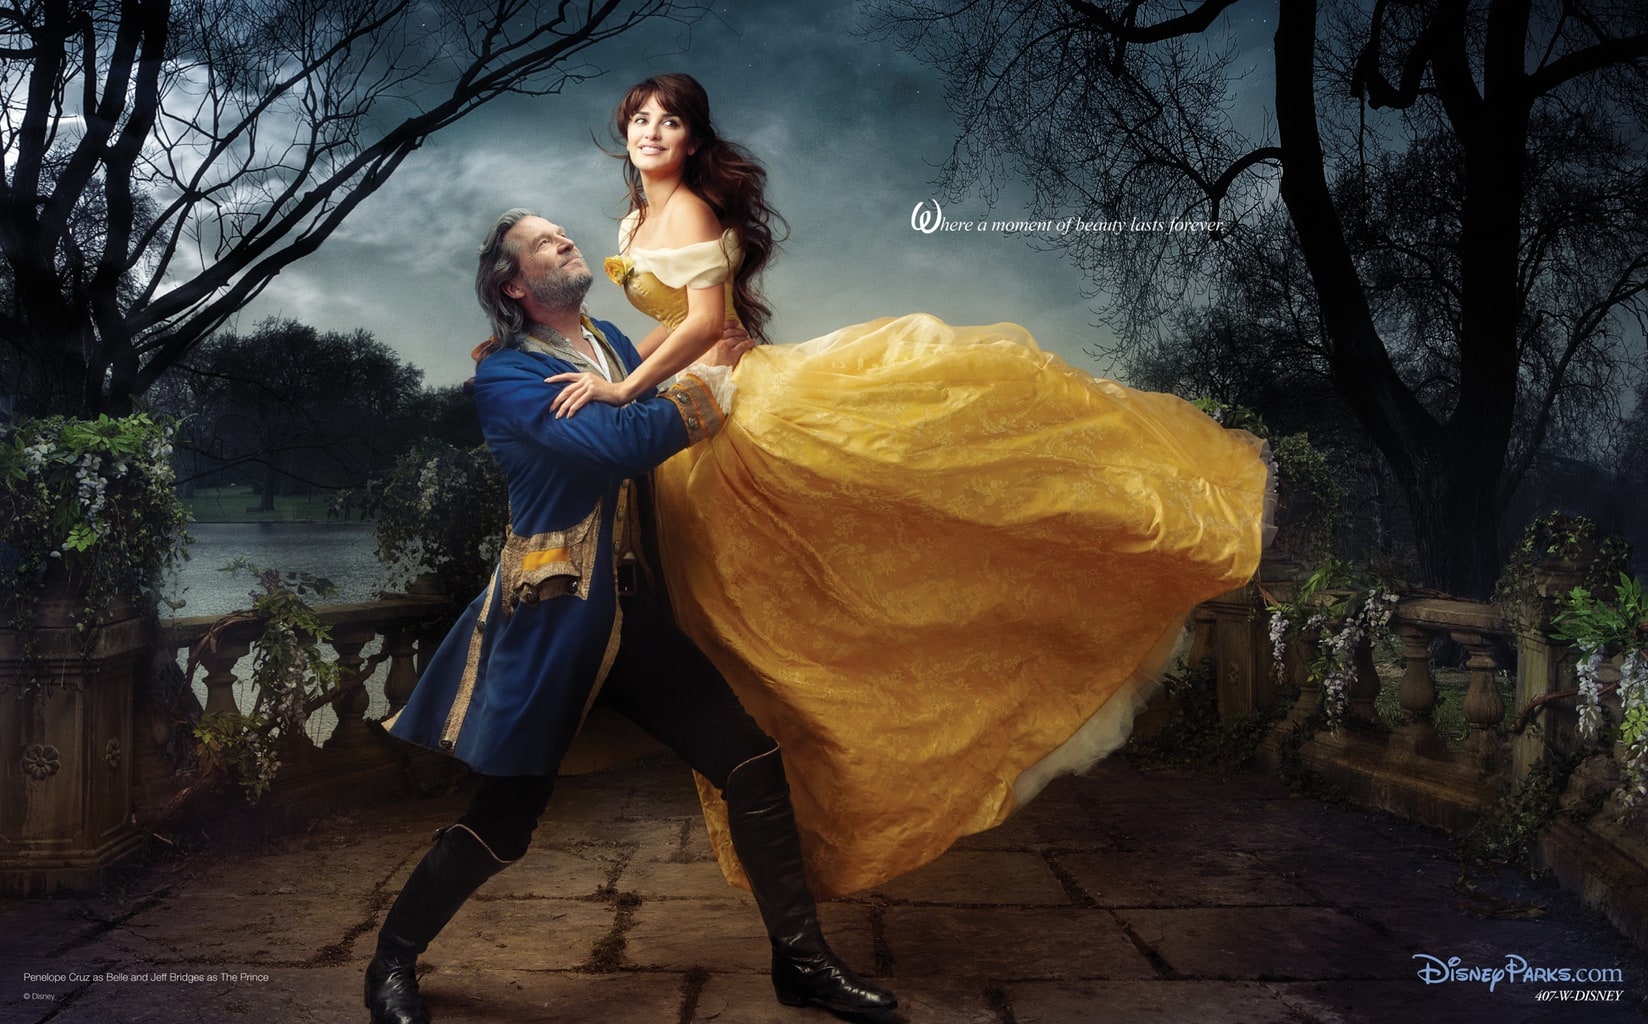 Penelope as Disney's Belle, photography by Annie Leibovitz